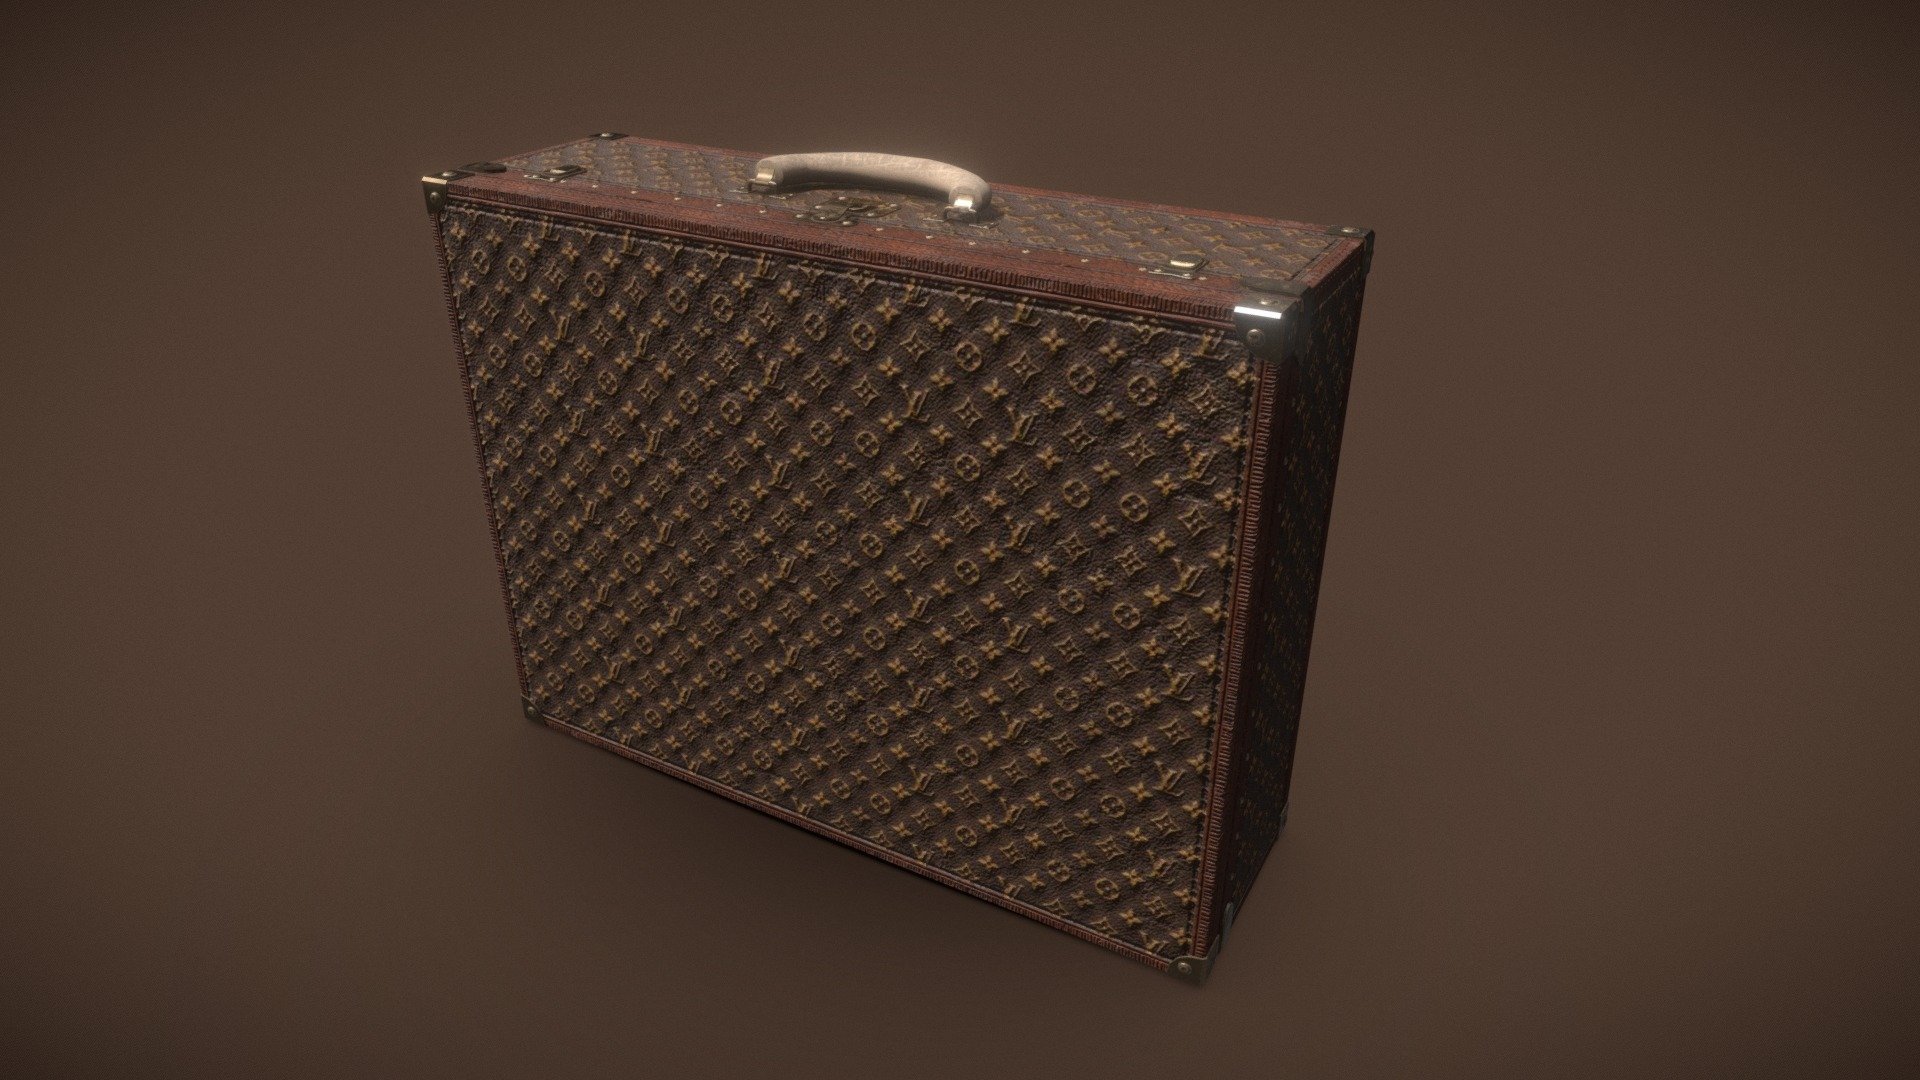 Louis Vuitton Suitcase modelled in Maya and Textured in substance painter!
Free to use, Enjoy! - Louis Vuitton Suitcase - Download Free 3D model by Jamie McFarlane (@jamiemcfarlane) 3d model